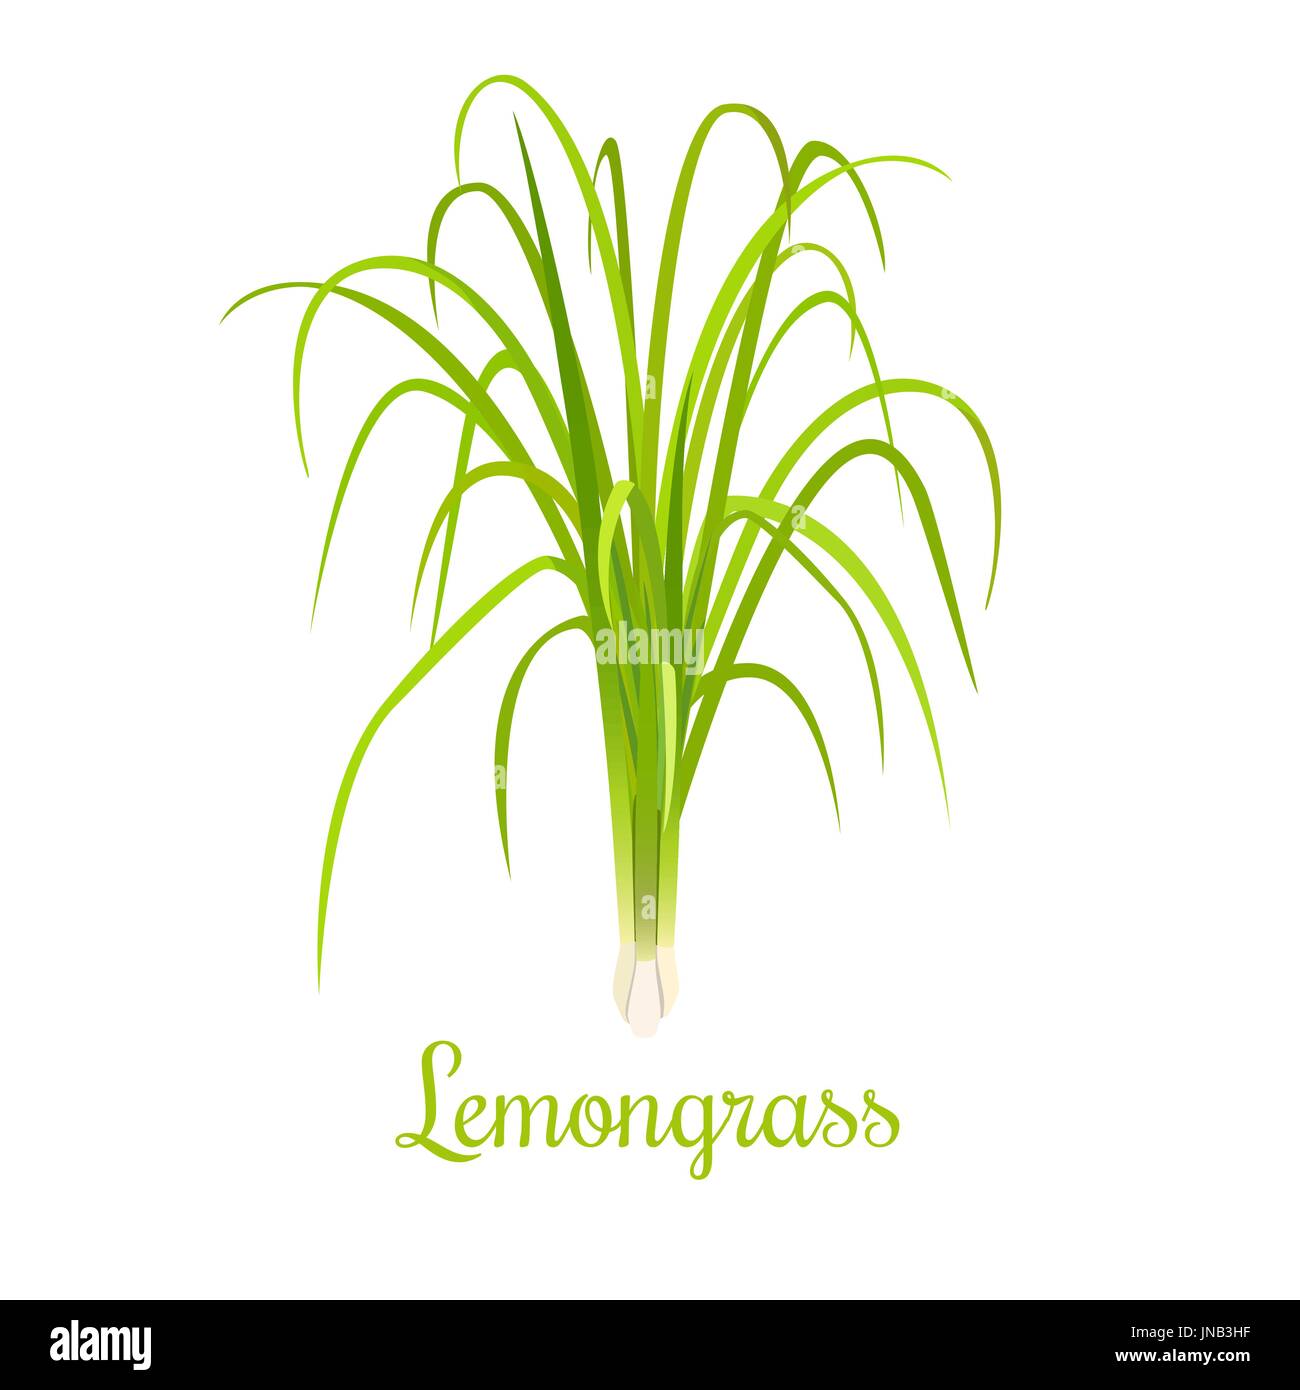 Lemongrass or Cymbopogon or Citronella grass. culinary herb. spicy. green leaves and root. Vector illustration. For cosmetics, labels, natural health  Stock Vector